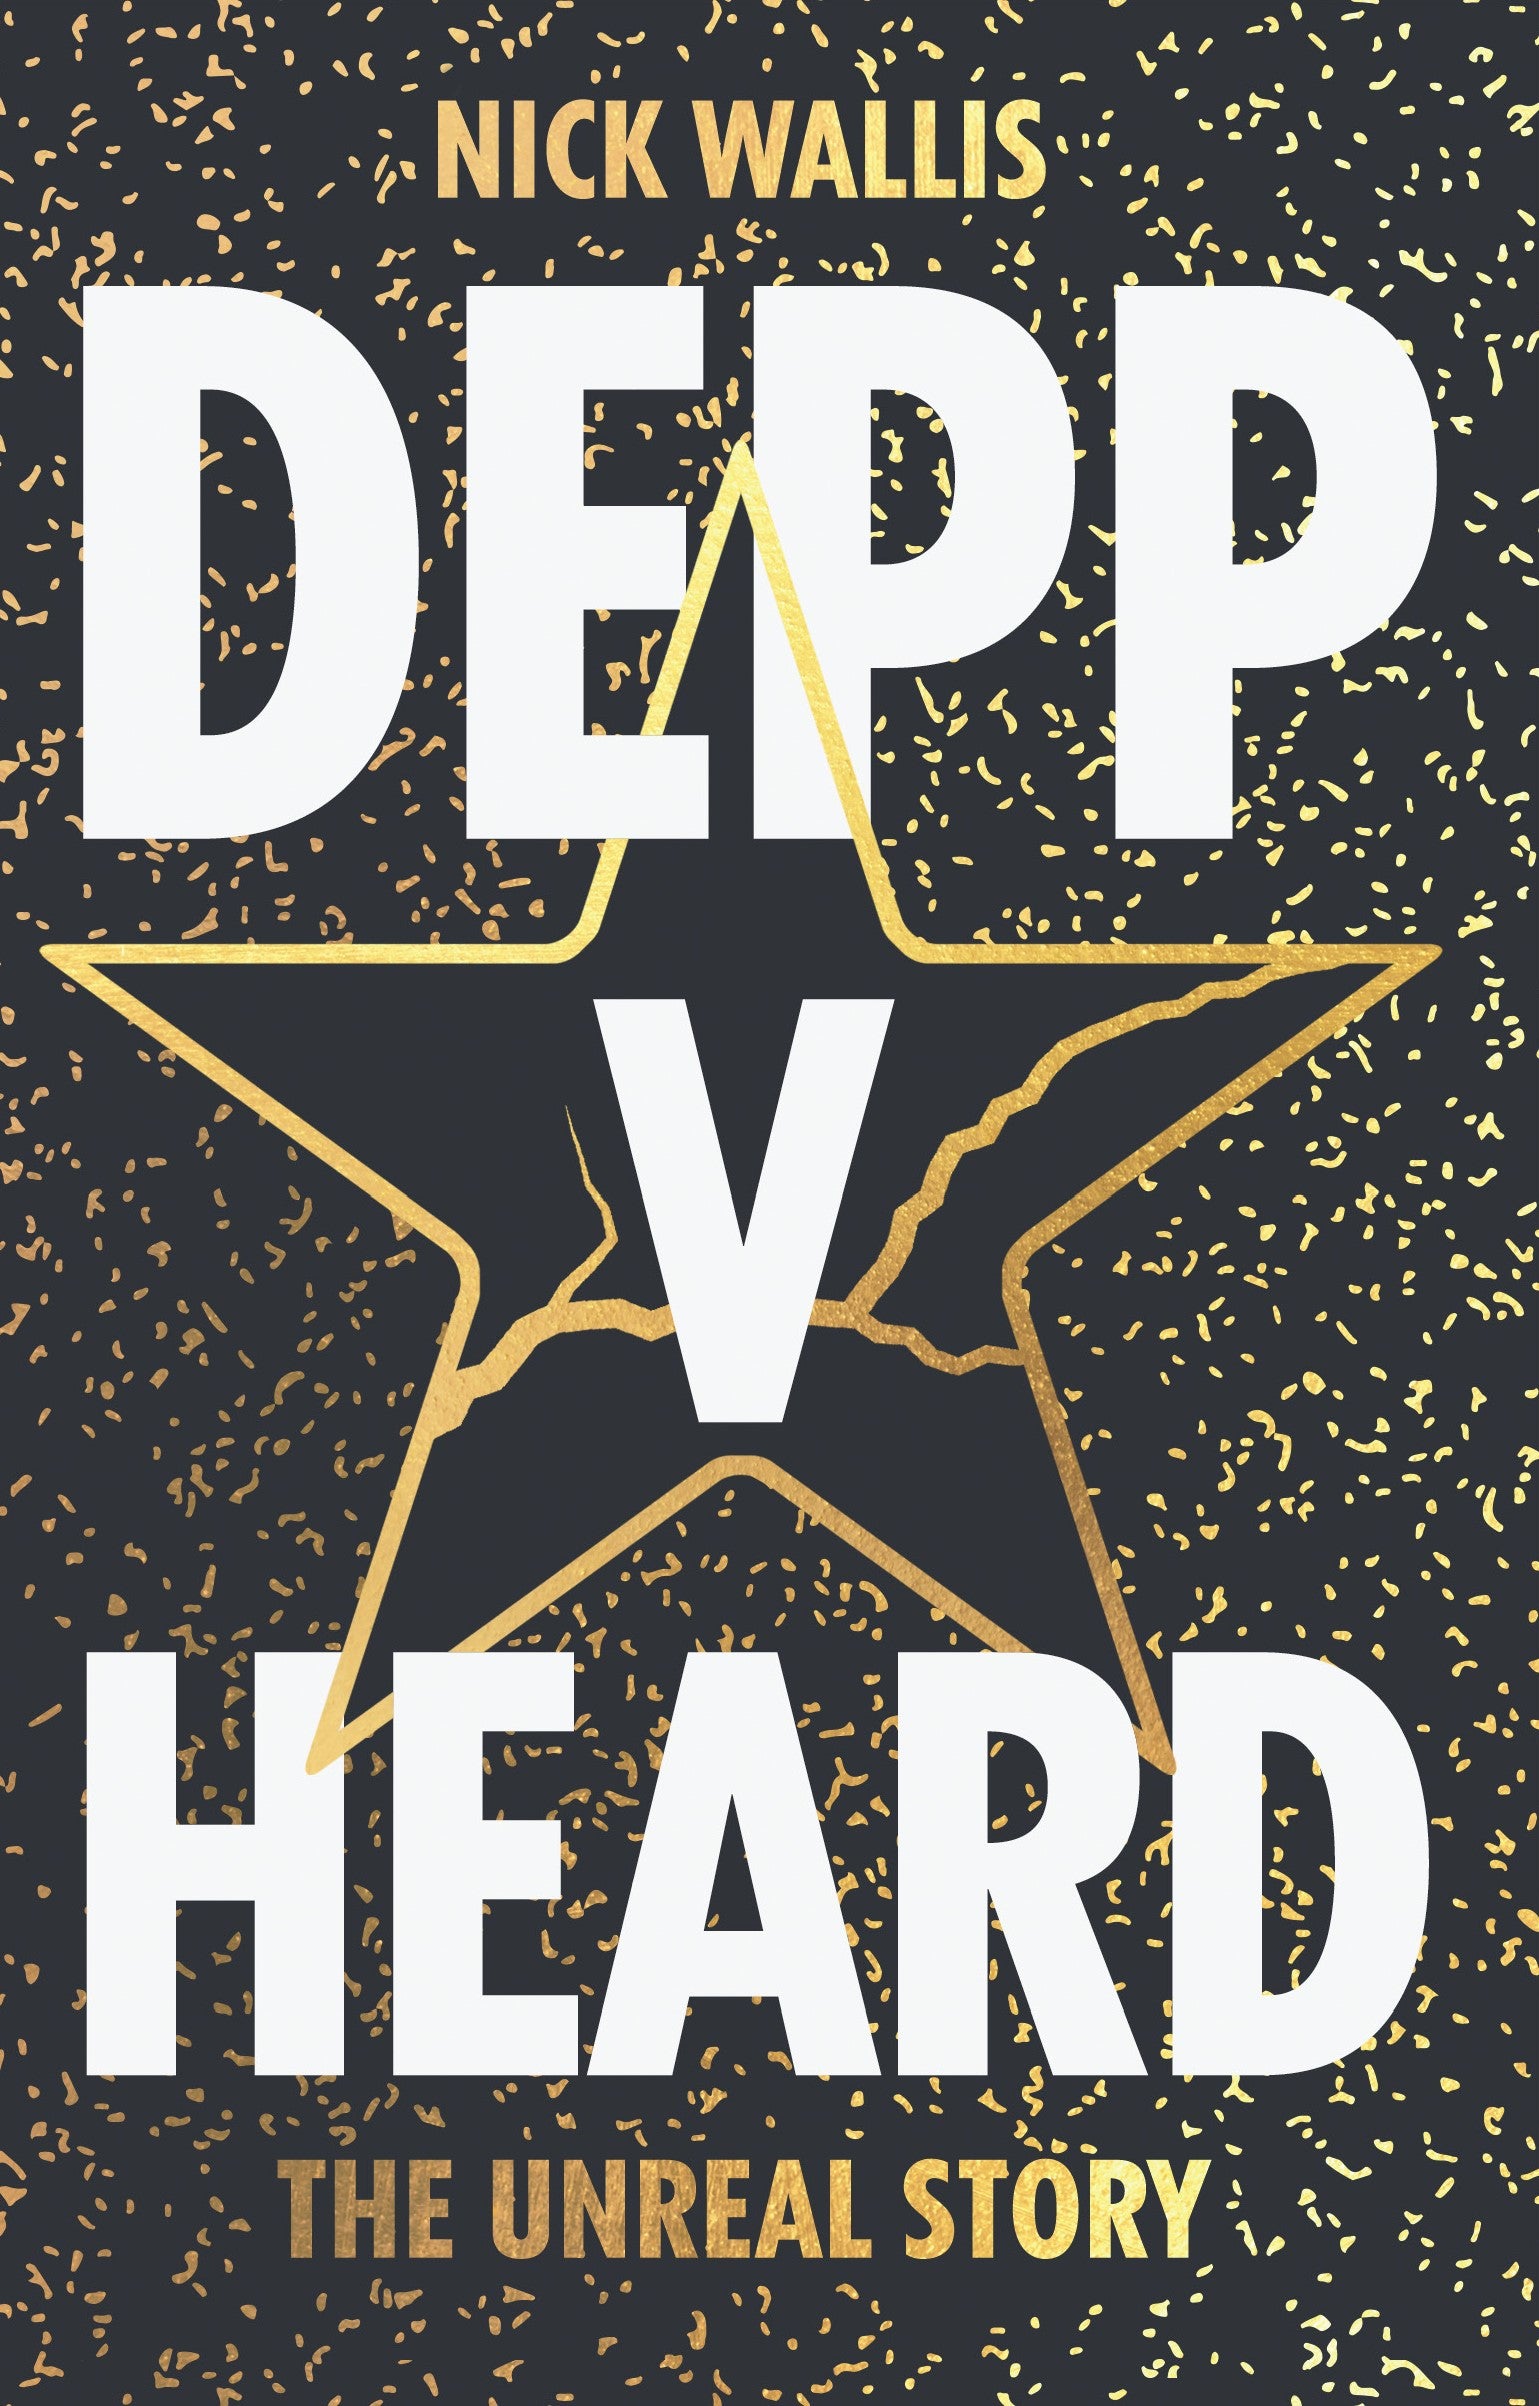 Depp v Heard: the unreal story out today - read the first two chapters